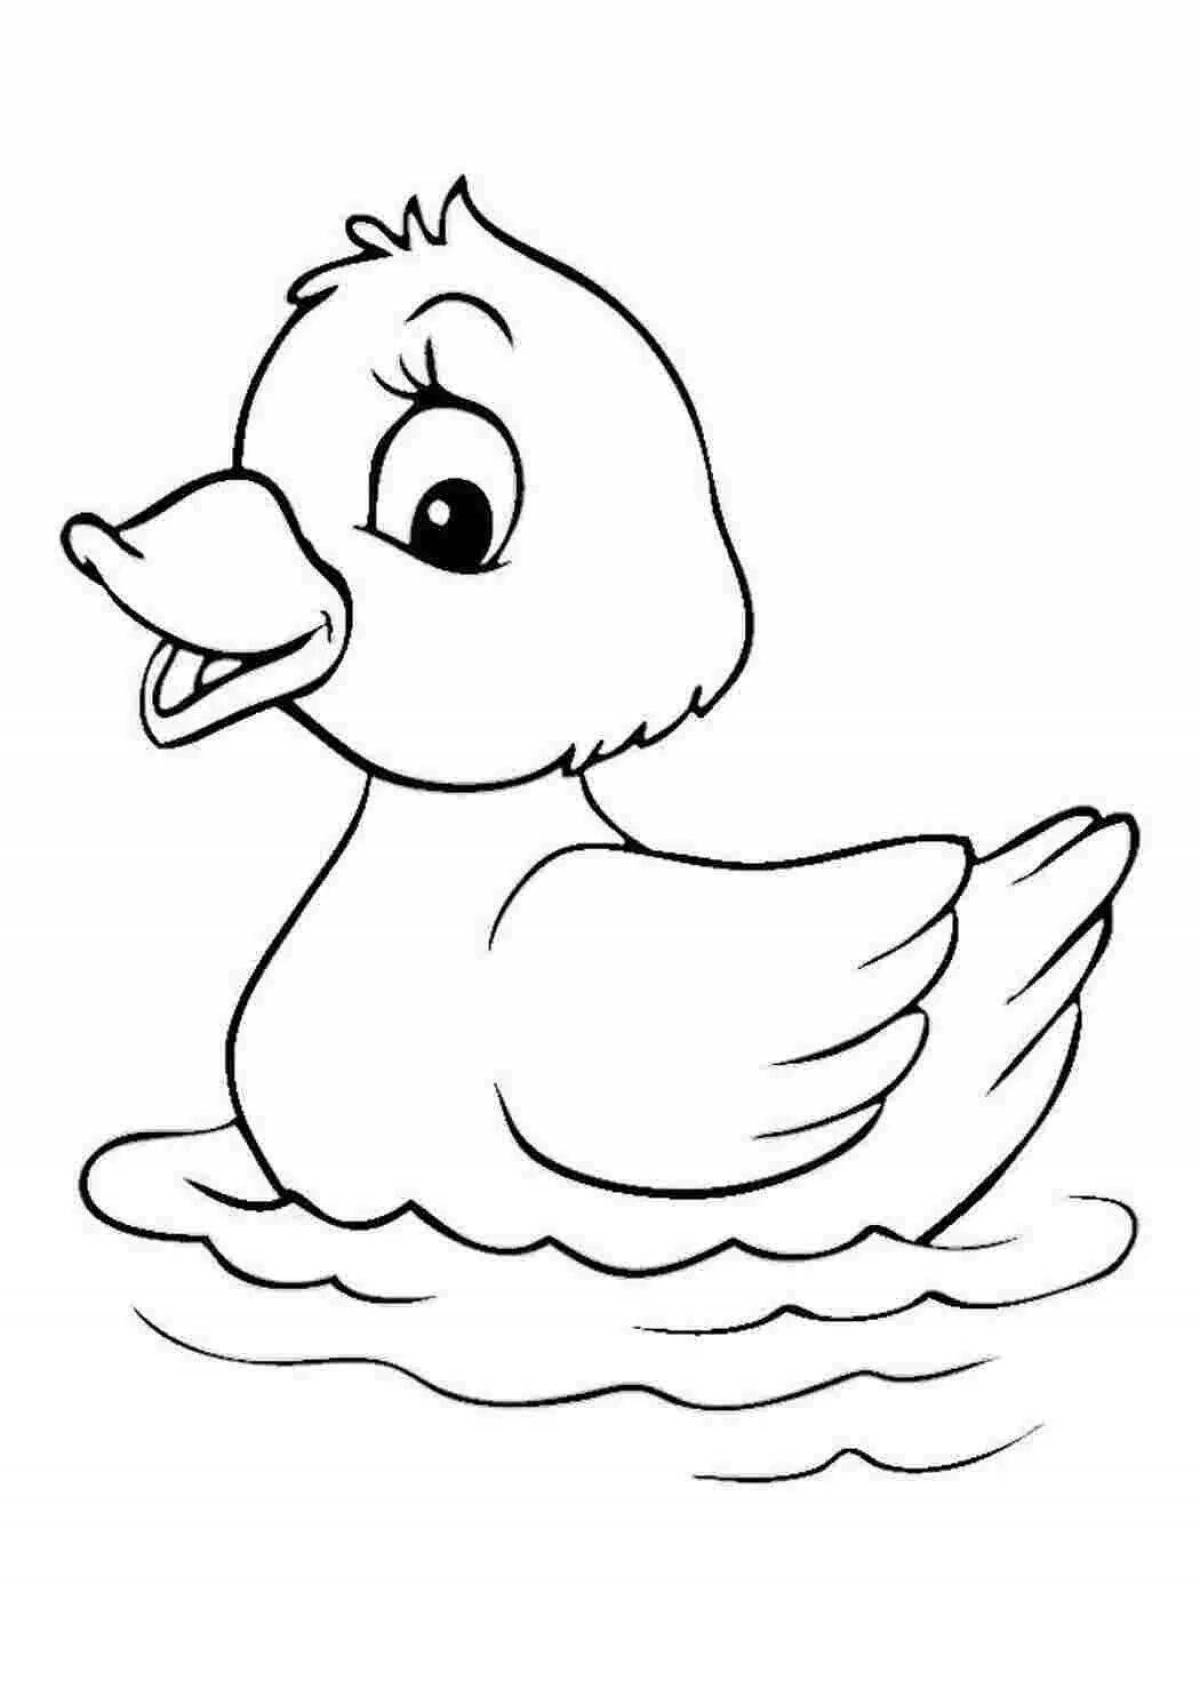 Duck picture for kids #2